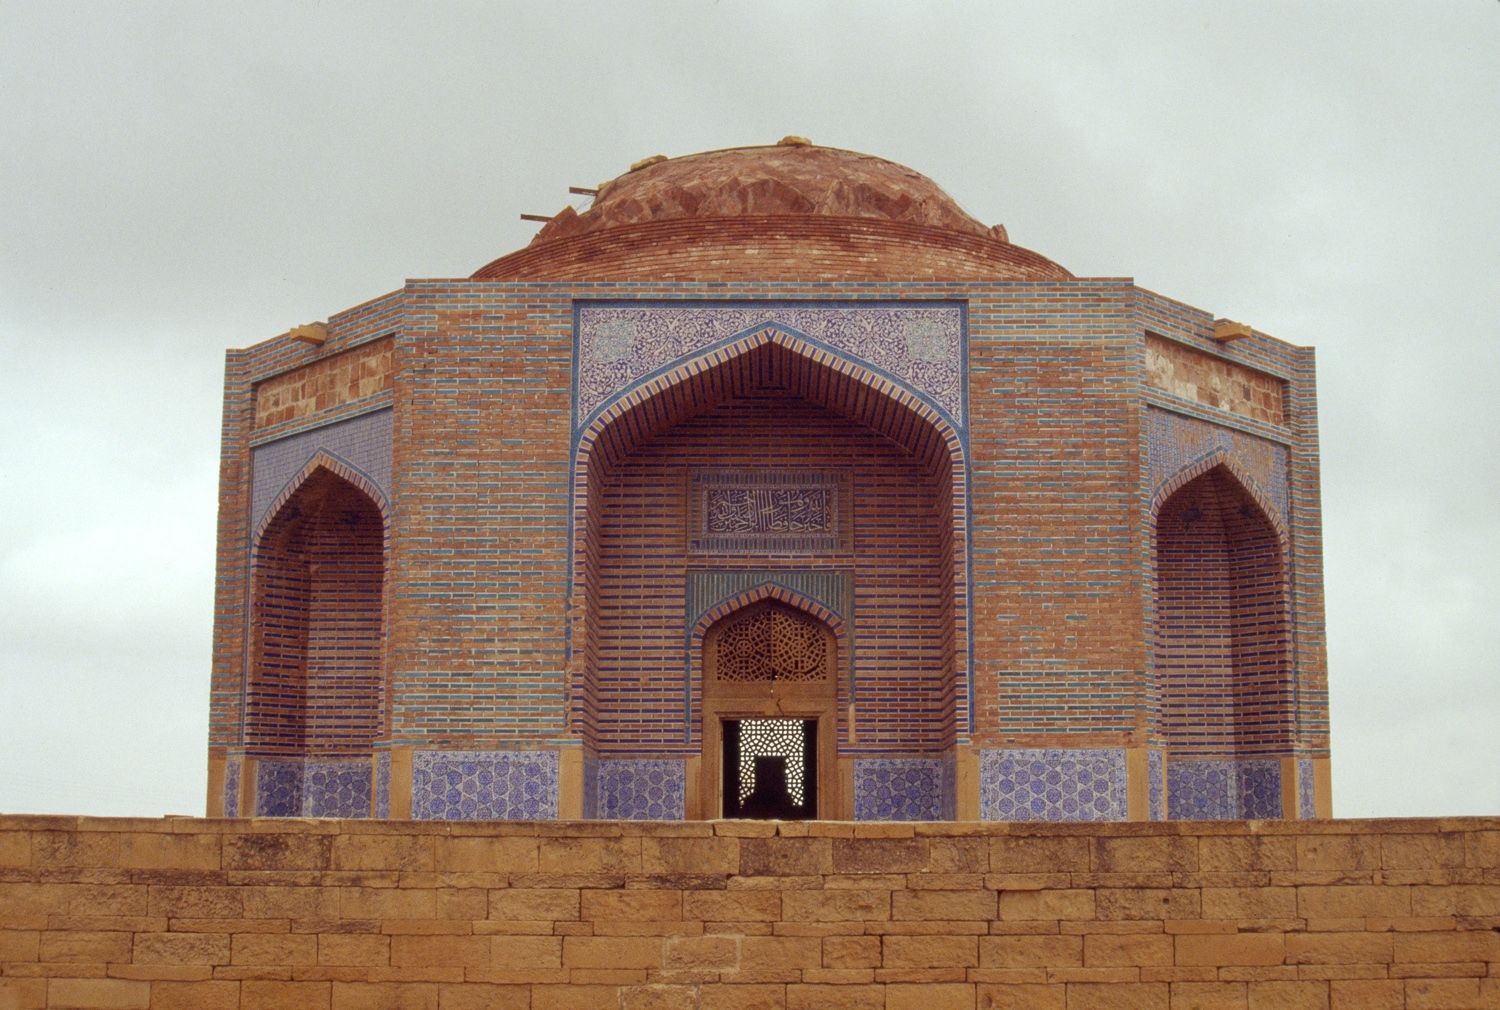 View of tomb from beyond enclosure wall, showing use of glazed blue tiles, enameled bricks and carved sandstone